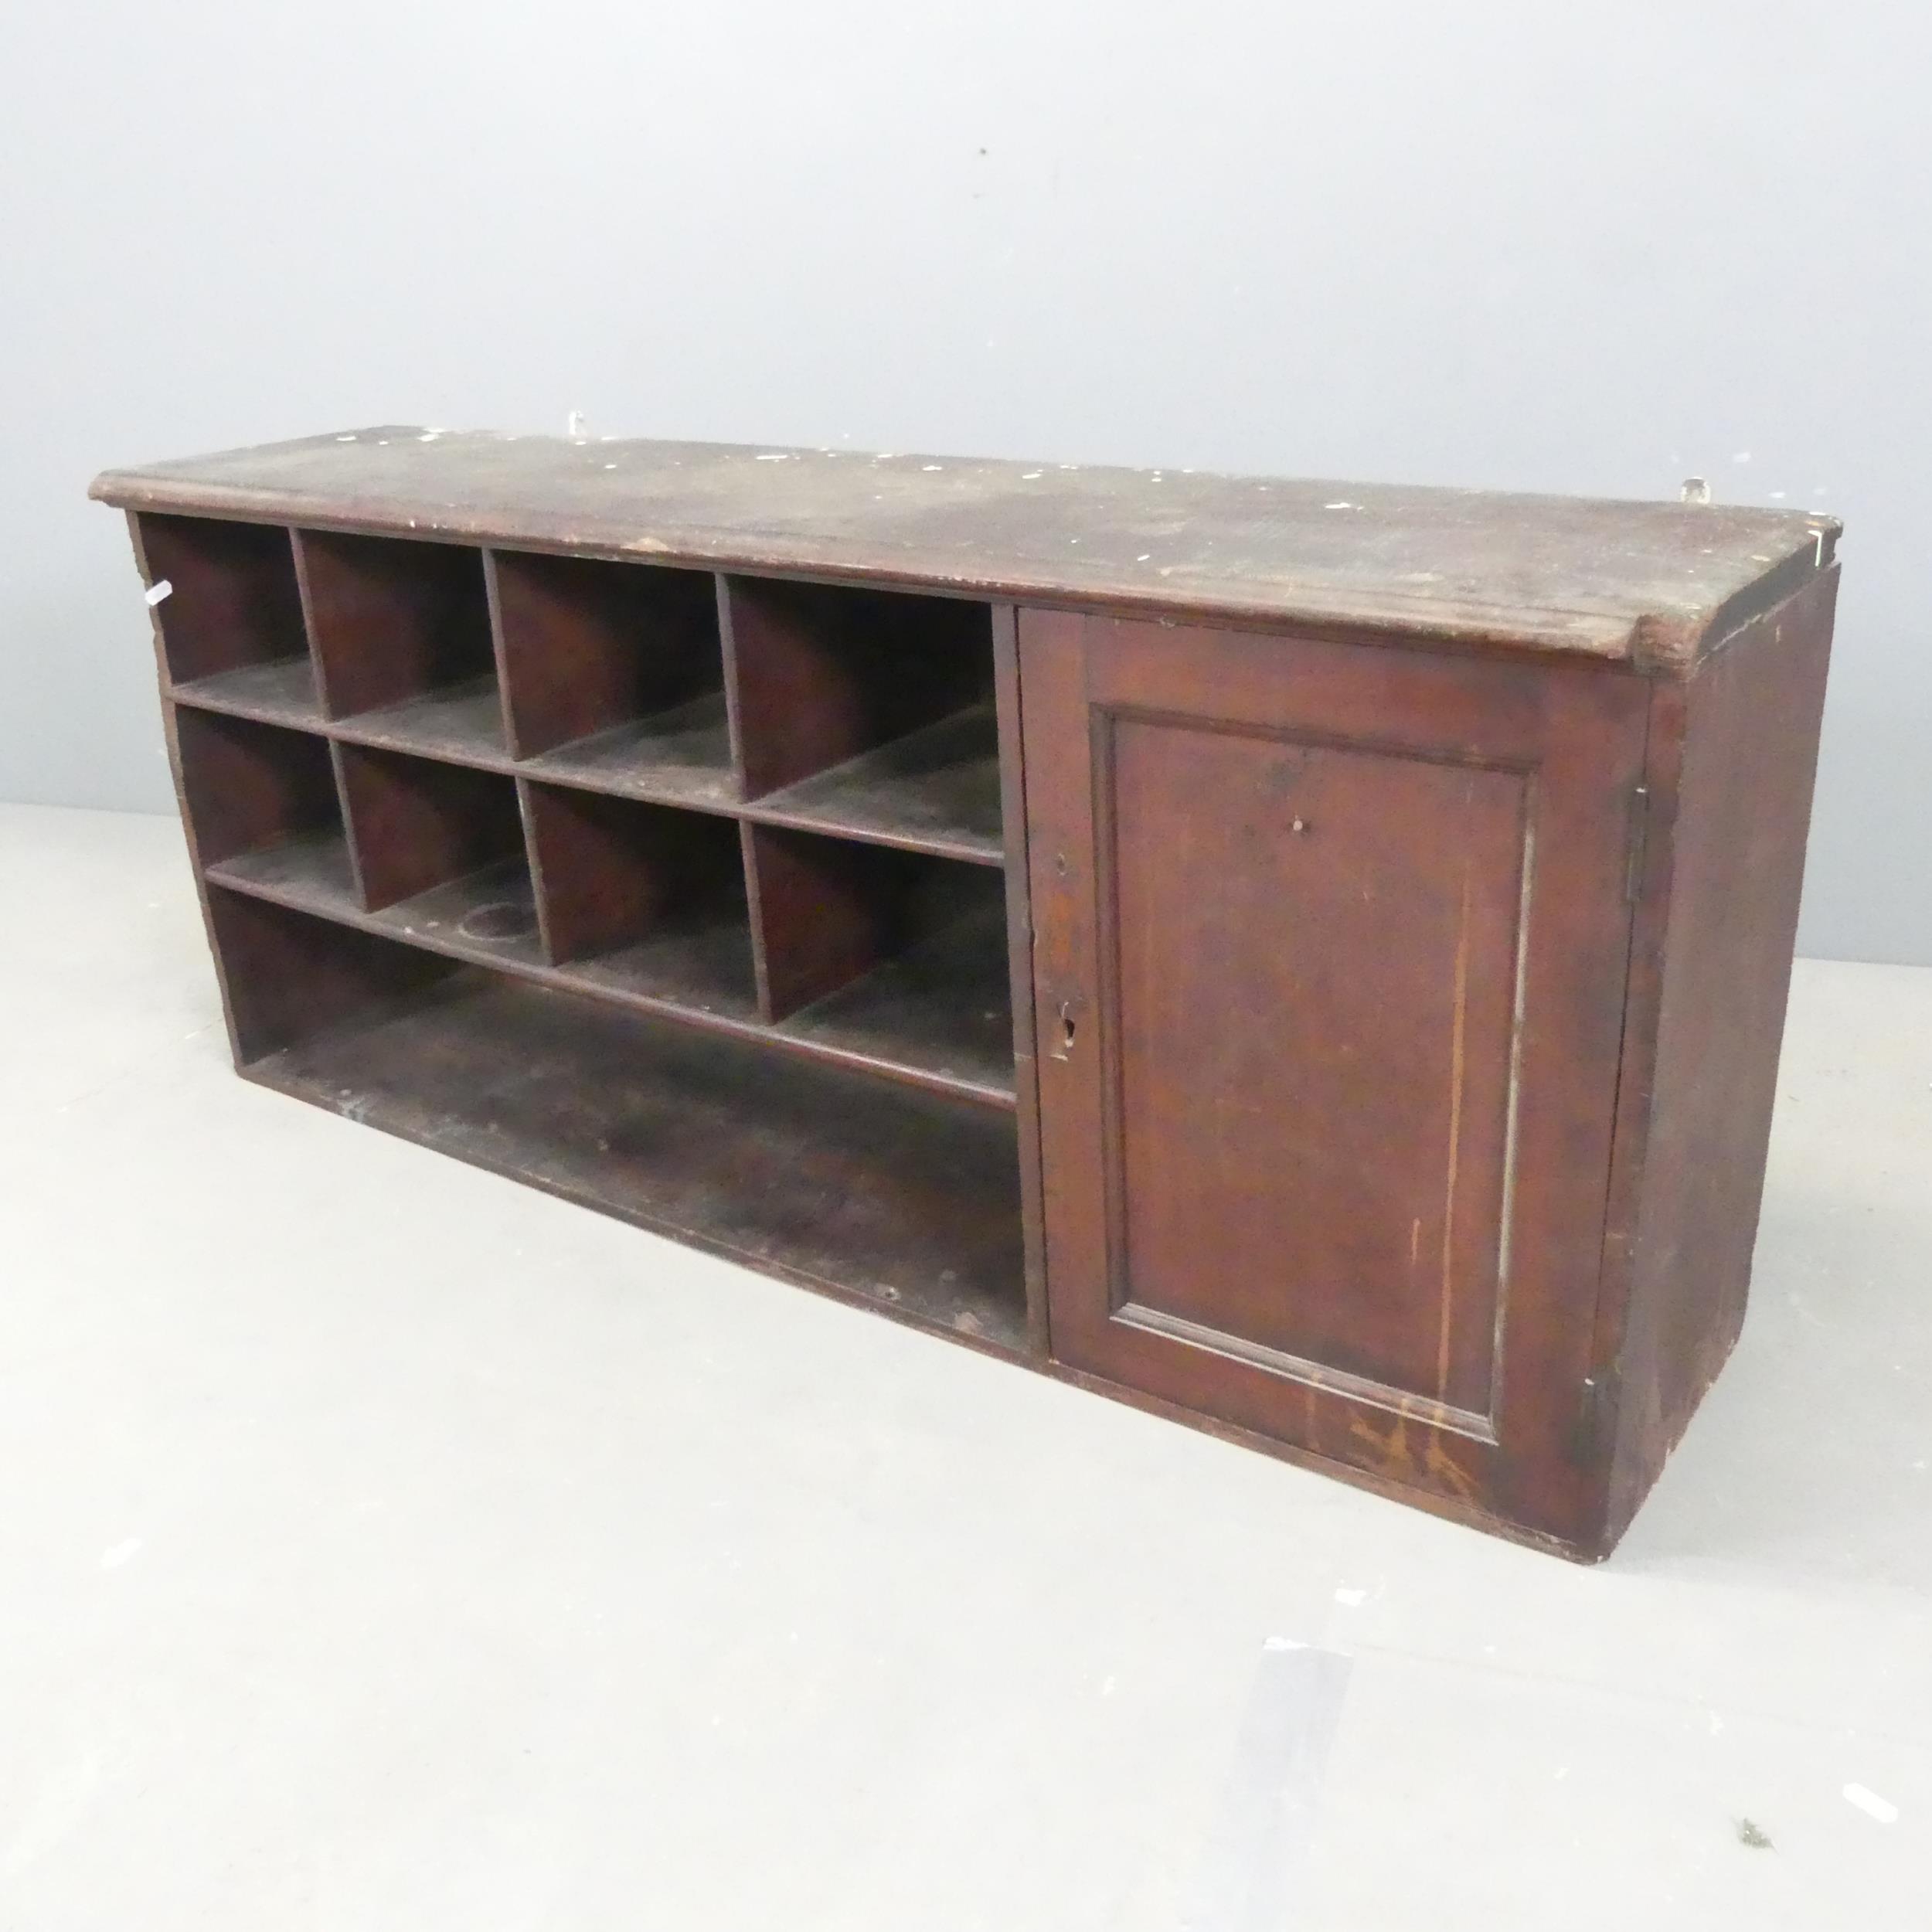 An early 20th century mahogany bank of pigeon holes. 131x56x32cm.